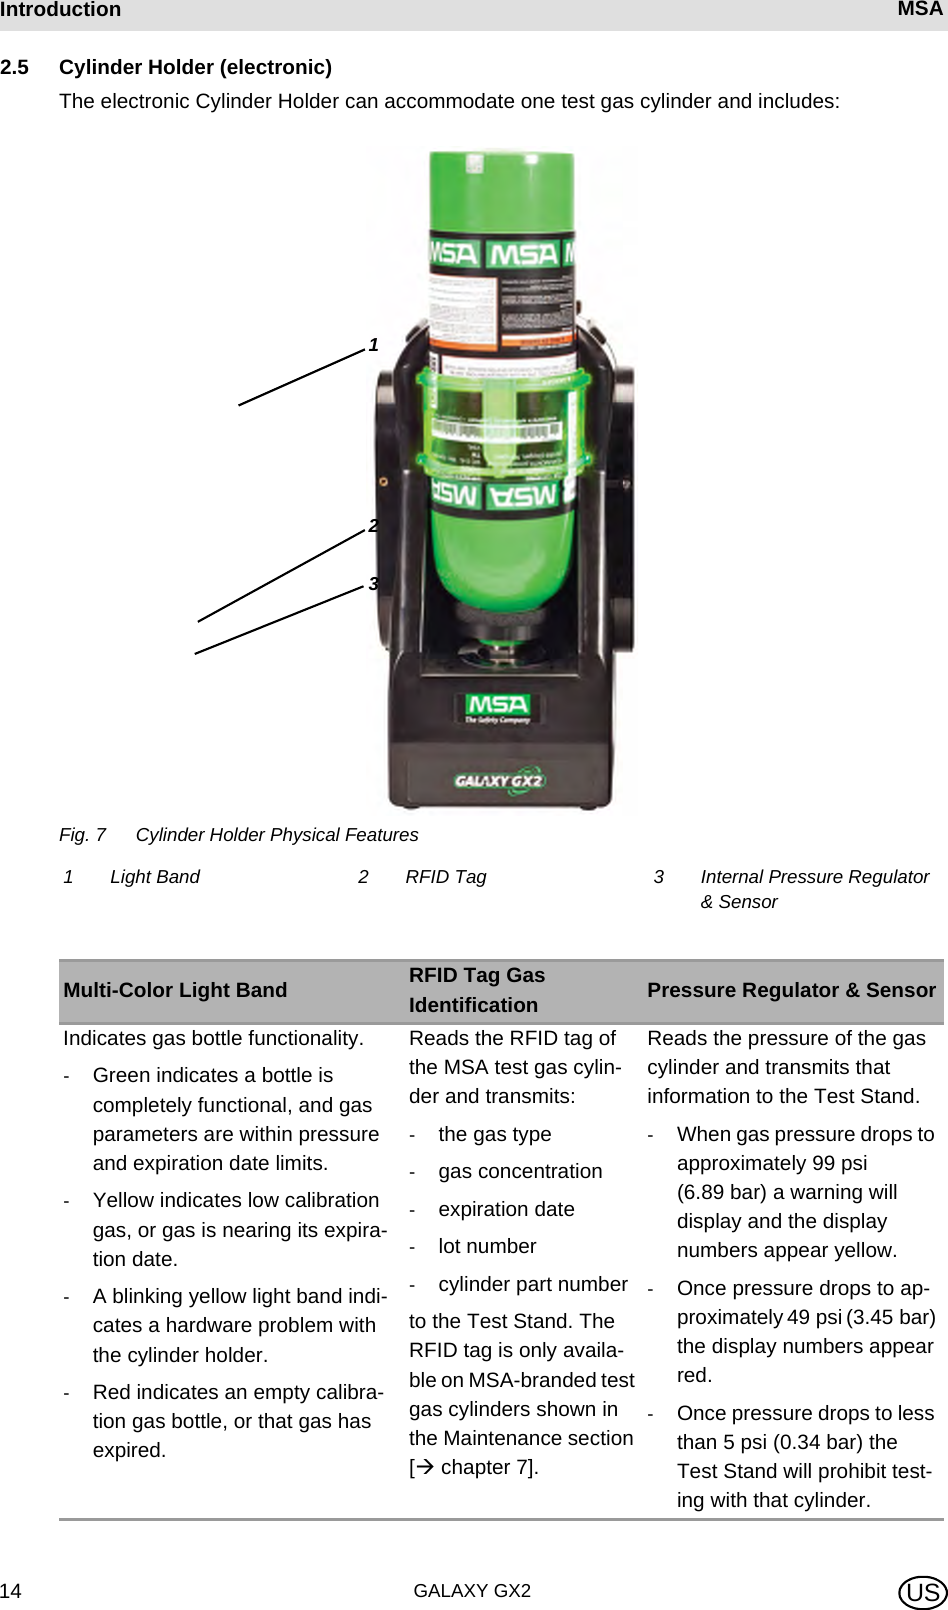 GALAXY GX214Introduction MSA US2.5 Cylinder Holder (electronic)The electronic Cylinder Holder can accommodate one test gas cylinder and includes:Fig. 7 Cylinder Holder Physical Features1 Light Band 2 RFID Tag 3 Internal Pressure Regulator &amp; SensorMulti-Color Light Band RFID Tag Gas Identification Pressure Regulator &amp; SensorIndicates gas bottle functionality.-Green indicates a bottle is completely functional, and gas parameters are within pressure and expiration date limits.-Yellow indicates low calibration gas, or gas is nearing its expira-tion date. -A blinking yellow light band indi-cates a hardware problem with the cylinder holder.-Red indicates an empty calibra-tion gas bottle, or that gas has expired. Reads the RFID tag of the MSA test gas cylin-der and transmits:-the gas type-gas concentration-expiration date-lot number-cylinder part numberto the Test Stand. The RFID tag is only availa-ble on MSA-branded test gas cylinders shown in the Maintenance section [ chapter 7].Reads the pressure of the gas cylinder and transmits that information to the Test Stand.-When gas pressure drops to approximately 99 psi (6.89 bar) a warning will display and the display numbers appear yellow.-Once pressure drops to ap-proximately 49 psi (3.45 bar) the display numbers appear red.-Once pressure drops to less than 5 psi (0.34 bar) the Test Stand will prohibit test-ing with that cylinder.123